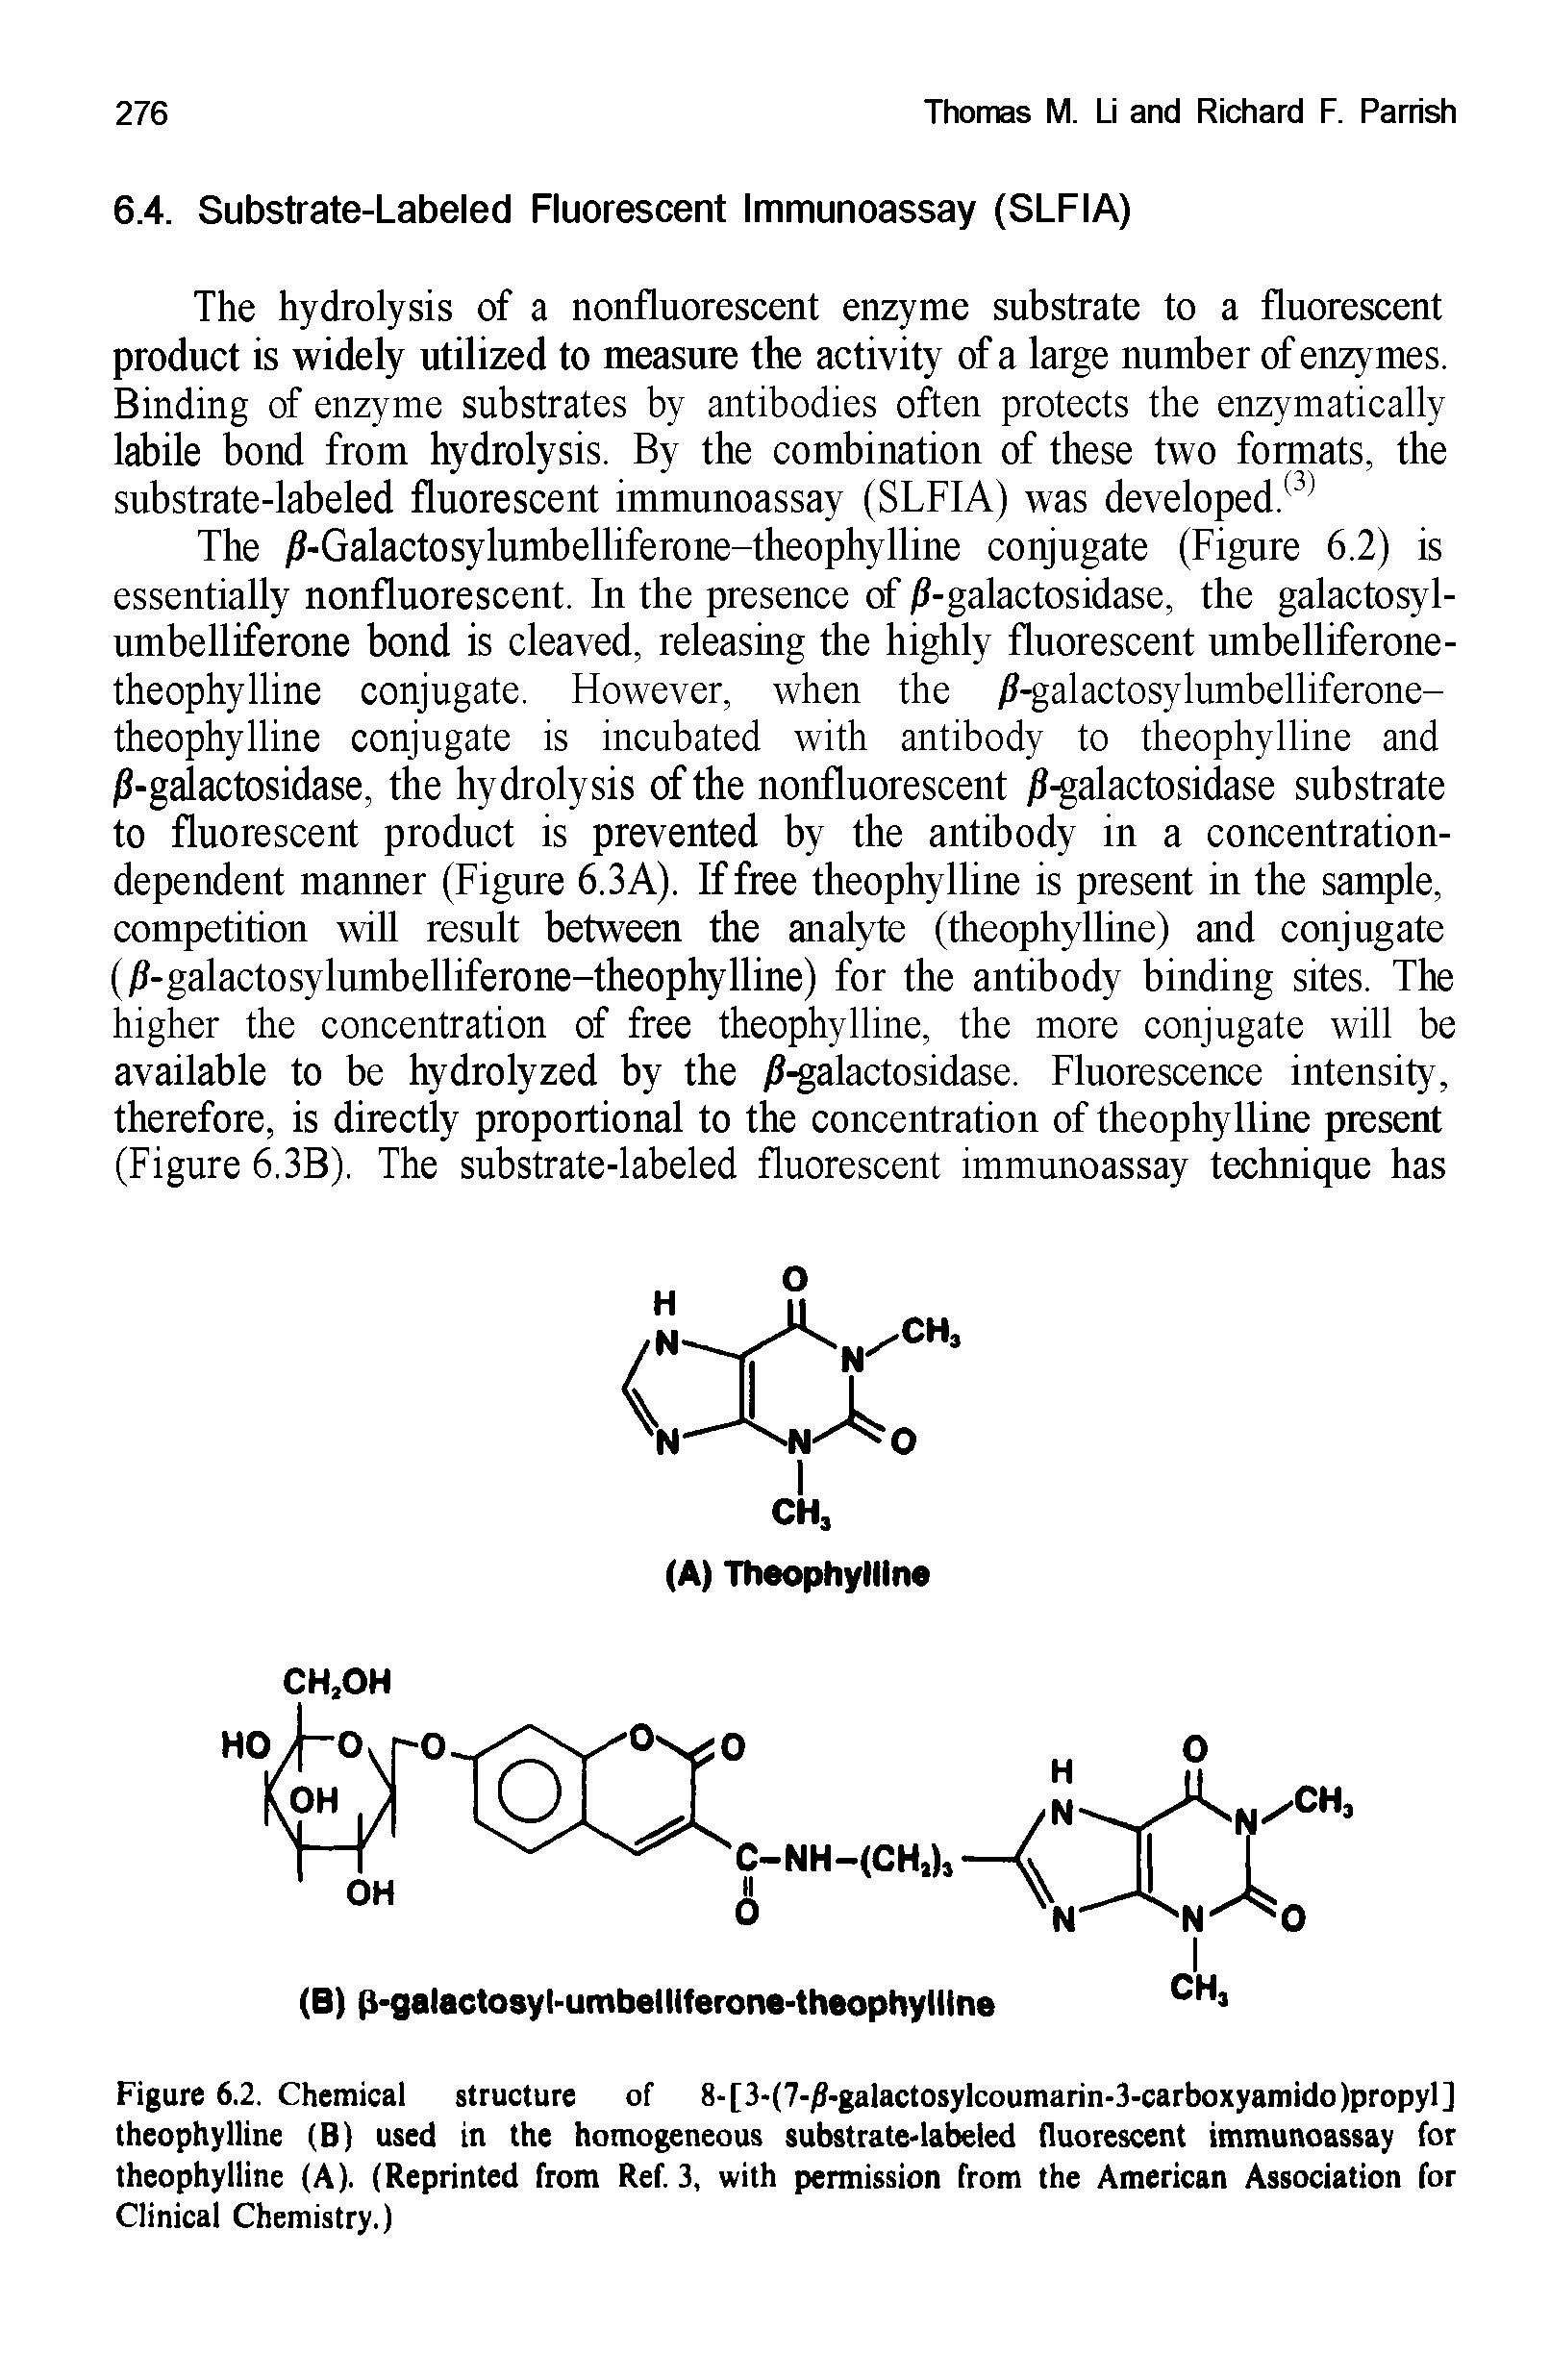 Figure 6.2. Chemical structure of 8-[3-(7-/)-galactosylcoumarin-3-carboxyamido )propyl ] theophylline (B) used in the homogeneous substrate-labeled fluorescent immunoassay for theophylline (A). (Reprinted from Ref. 3, with permission from the American Association for Clinical Chemistry.)...